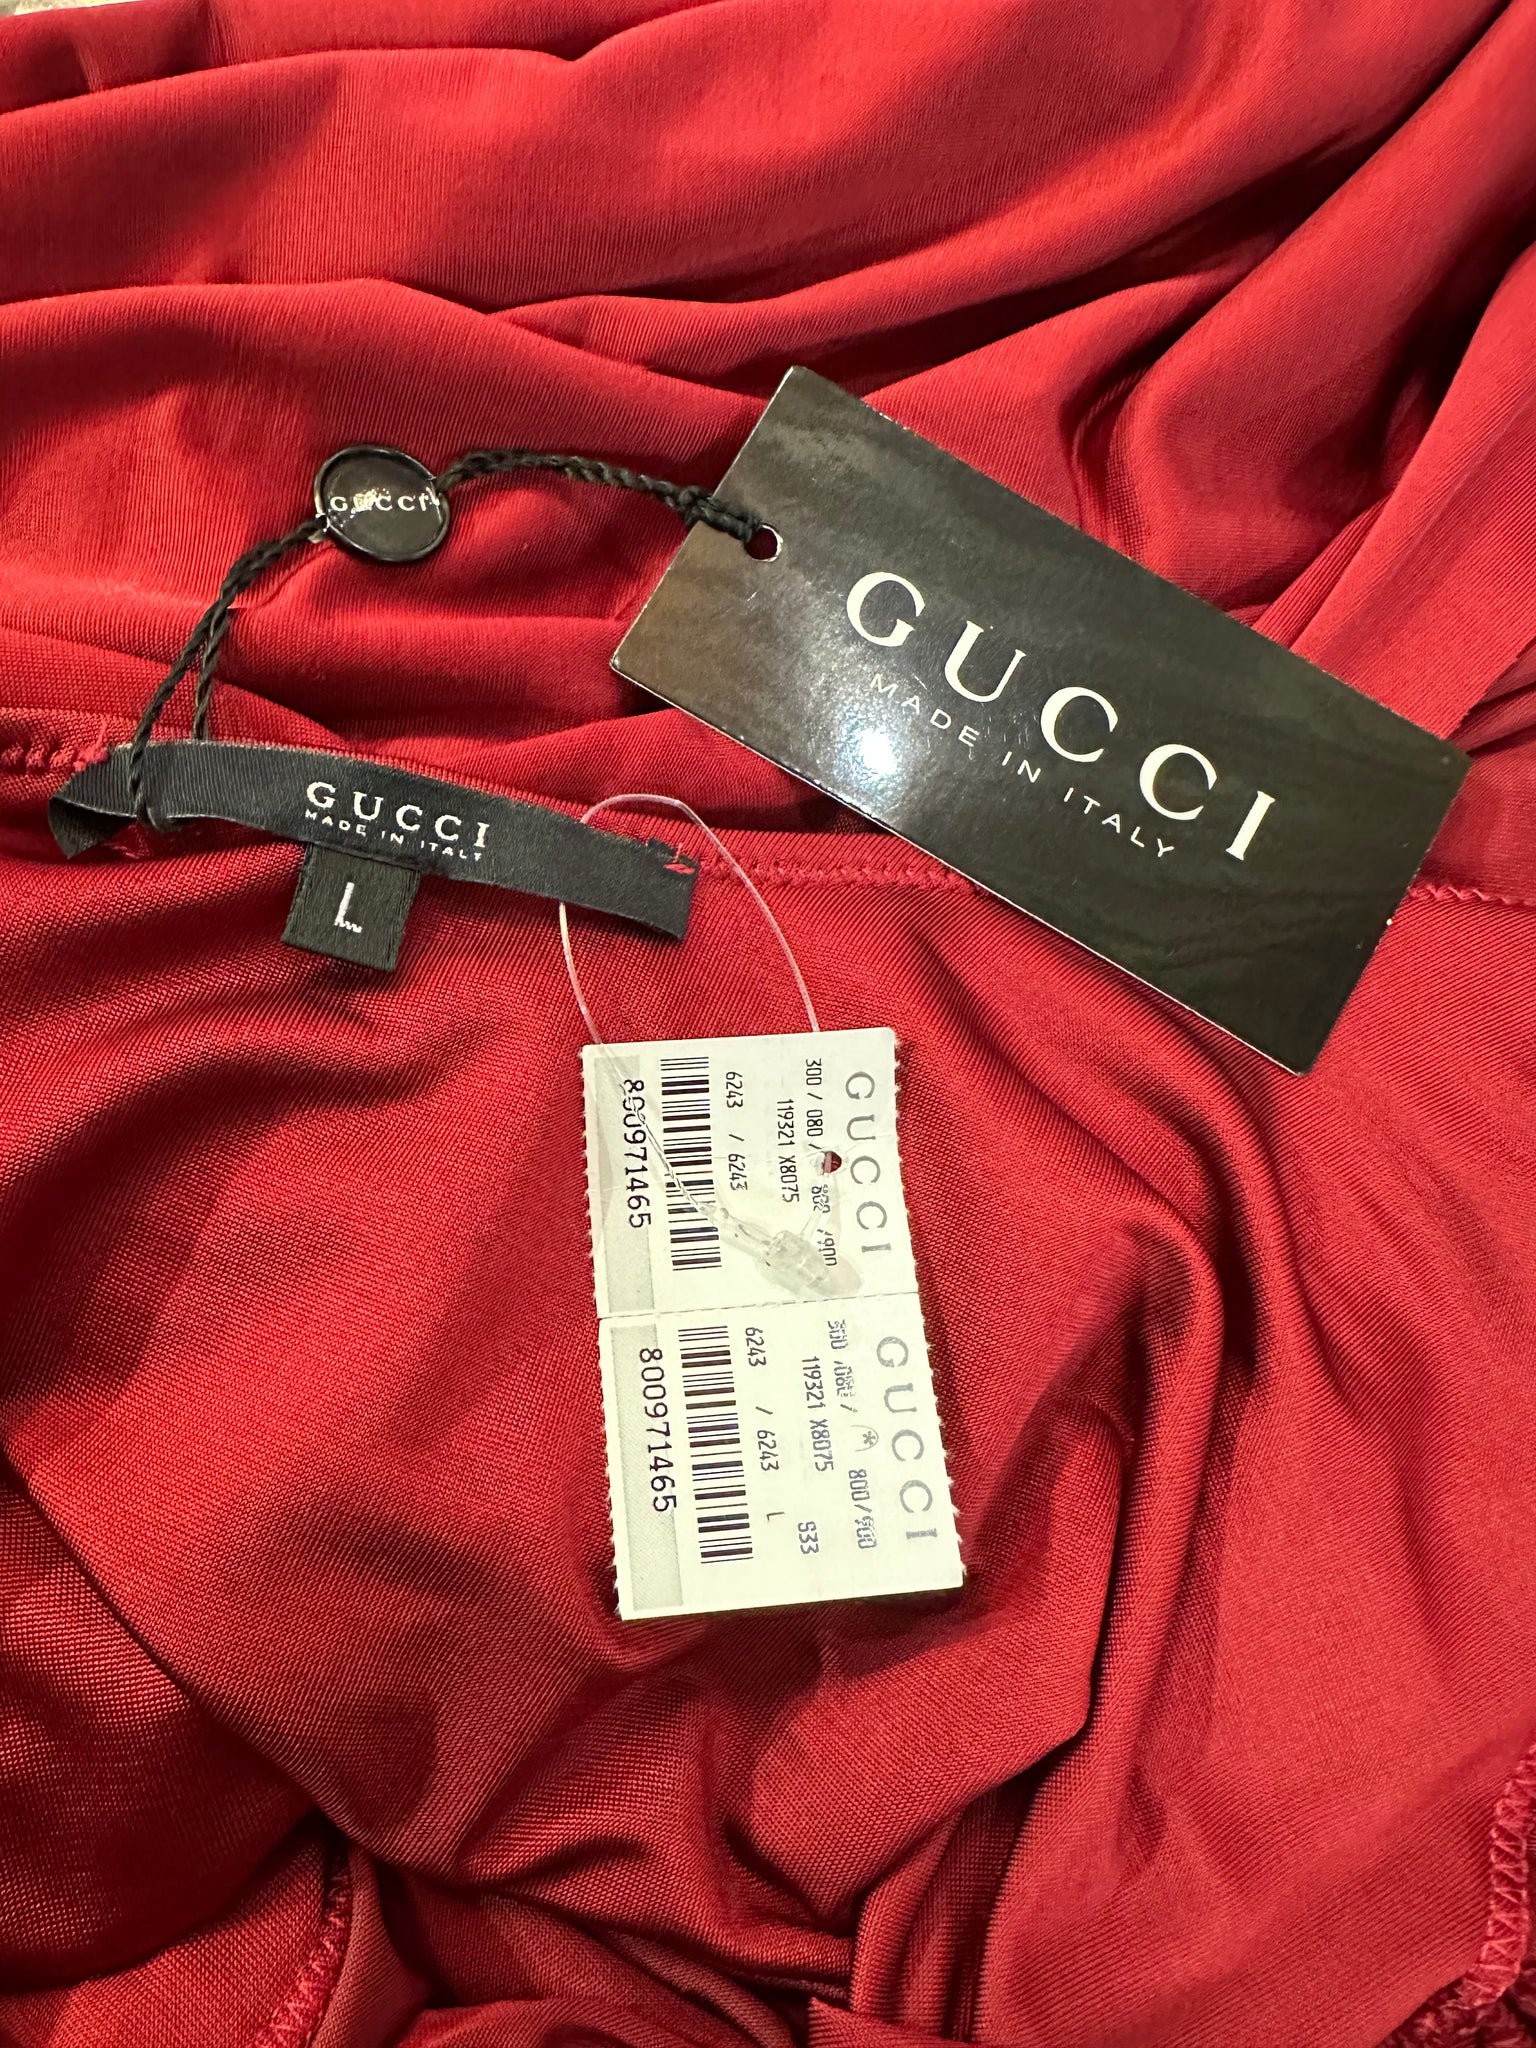 Tom Ford for Gucci 2003 Red Jersey Convertible Body Con Dress LABEL 5 of 5